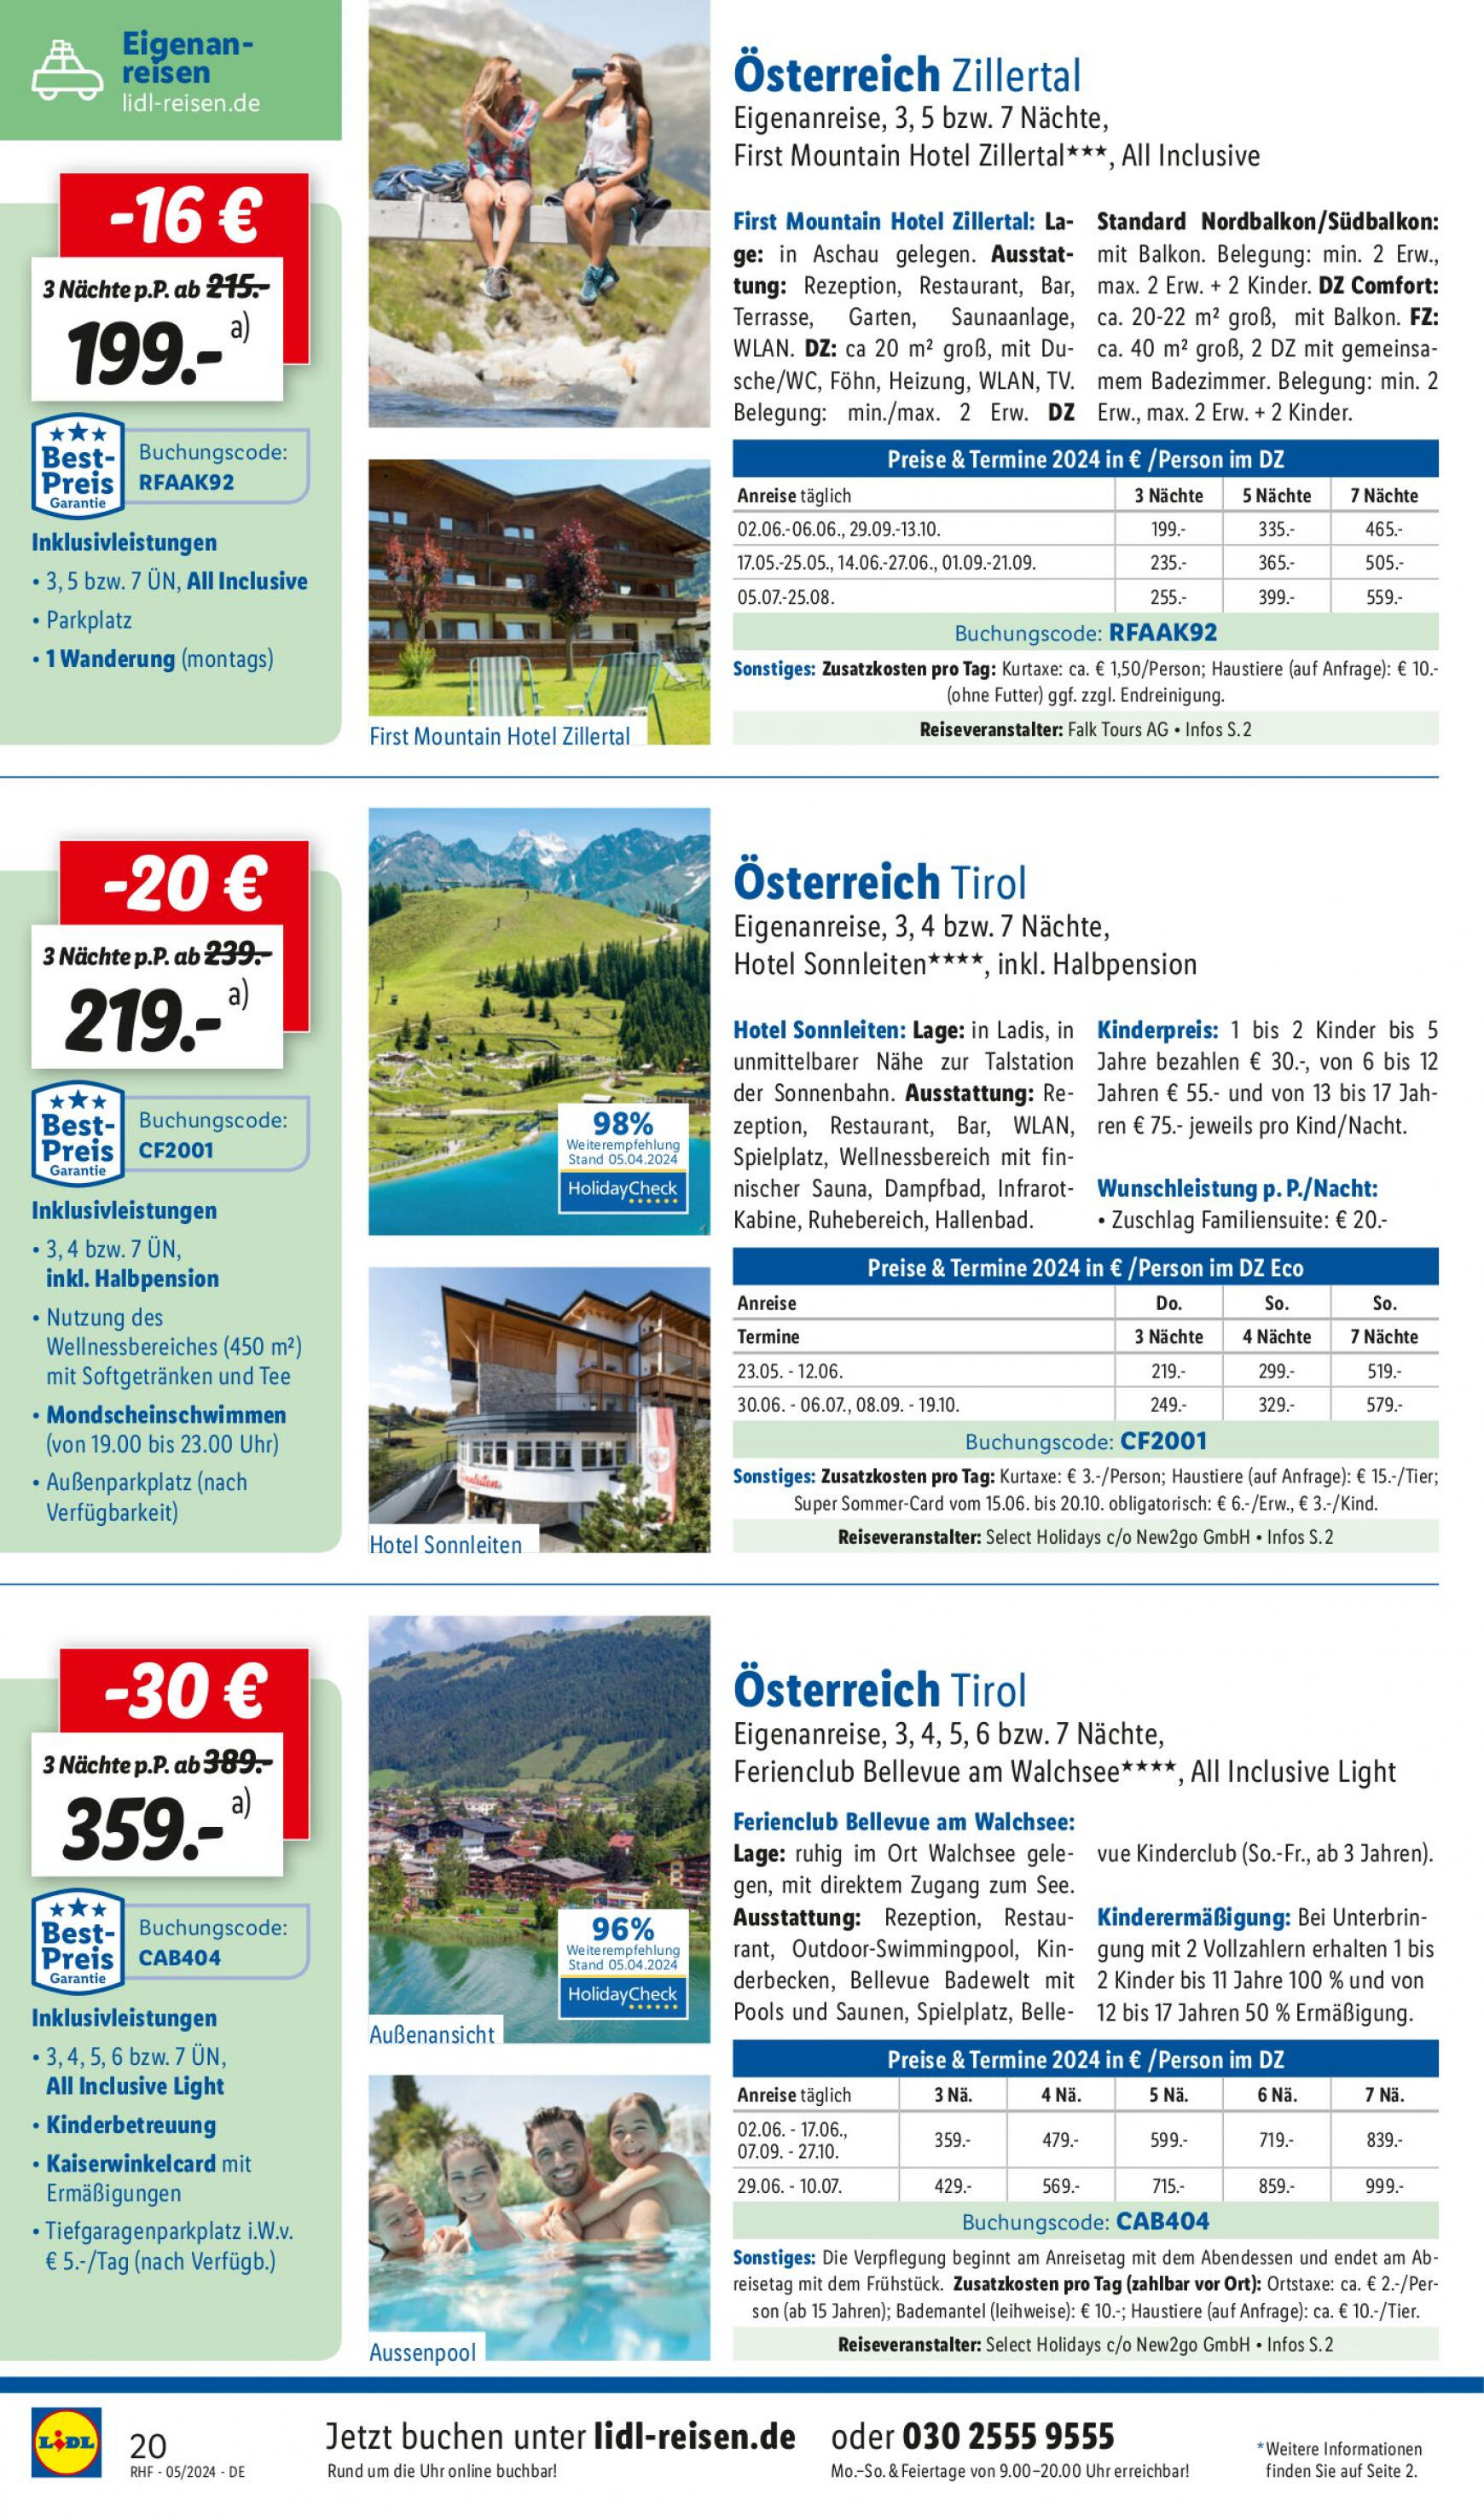 lidl - Flyer Lidl-reisen.at aktuell 27.04. - 31.05. - page: 20